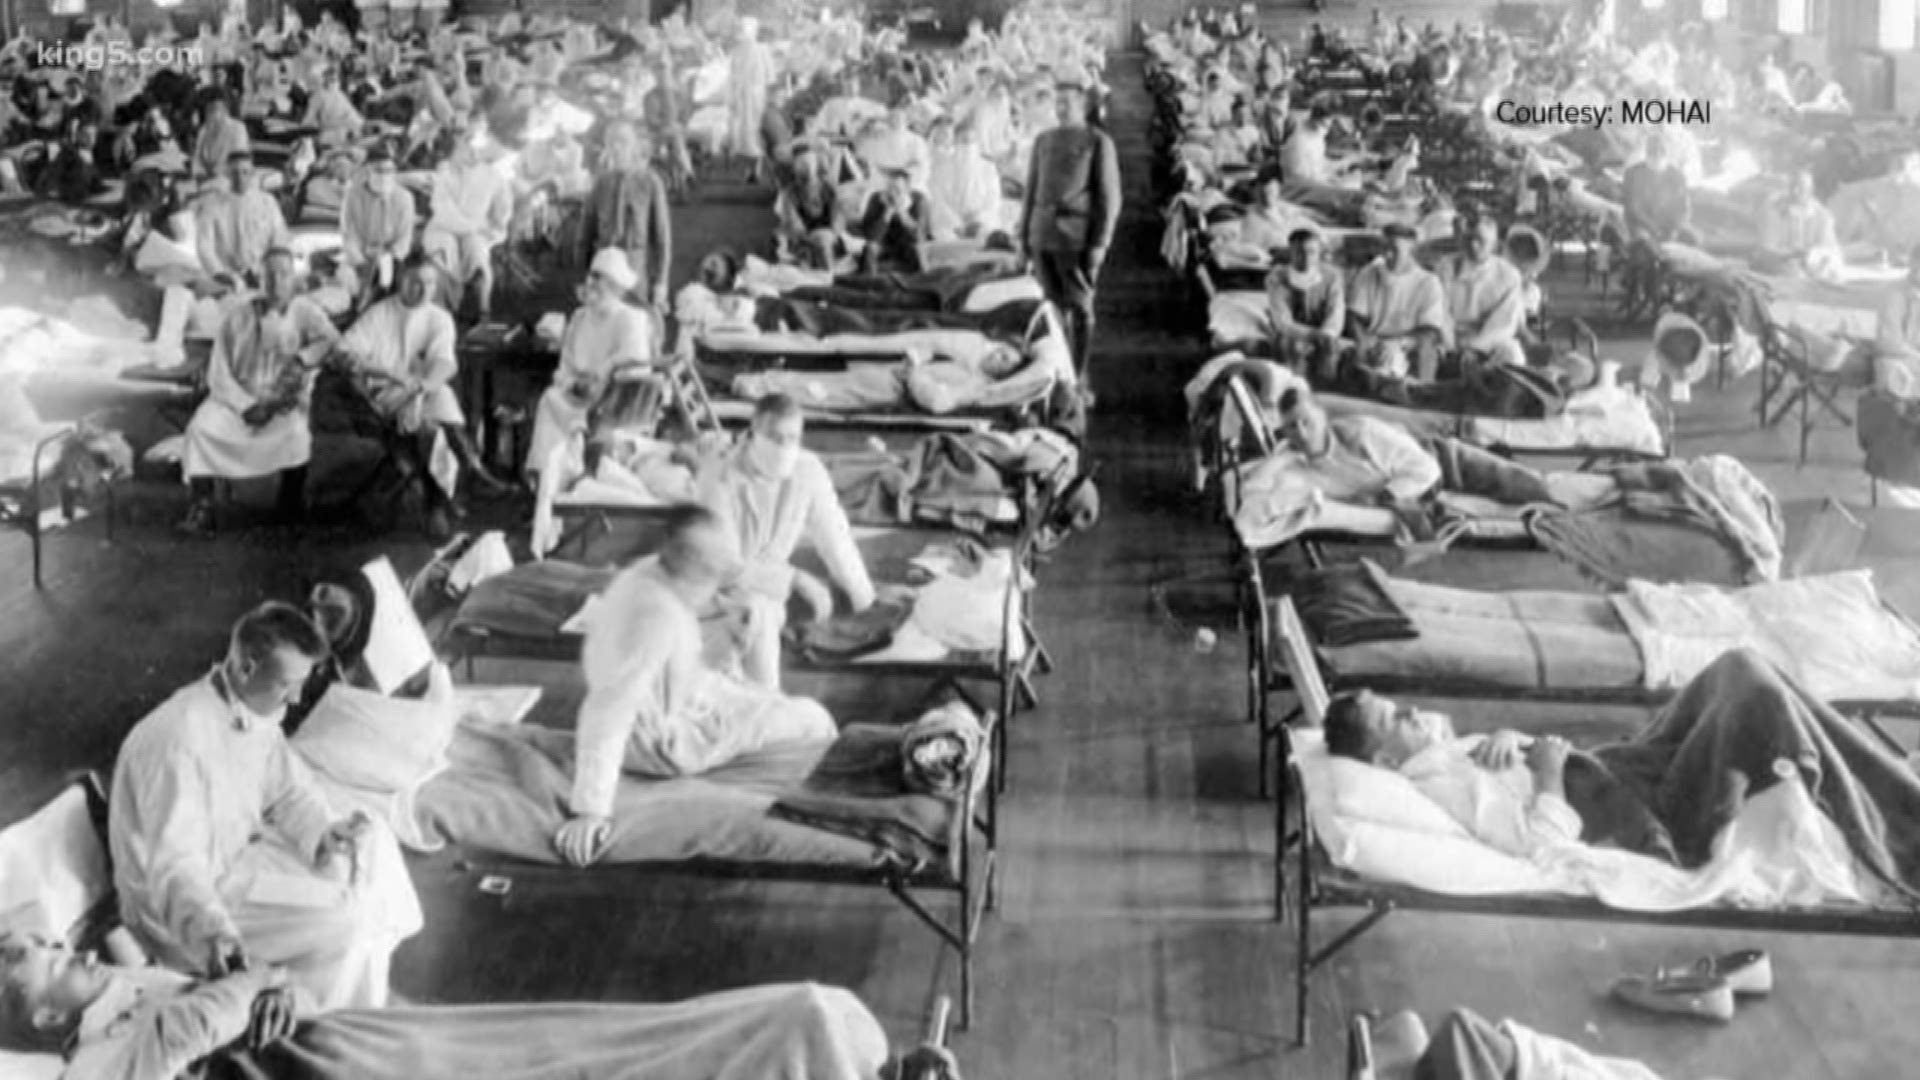 The coronavirus outbreak is not the first pandemic Seattle has faced. The city's response to the 1918 Spanish influenza outbreak could hold some valuable lessons.